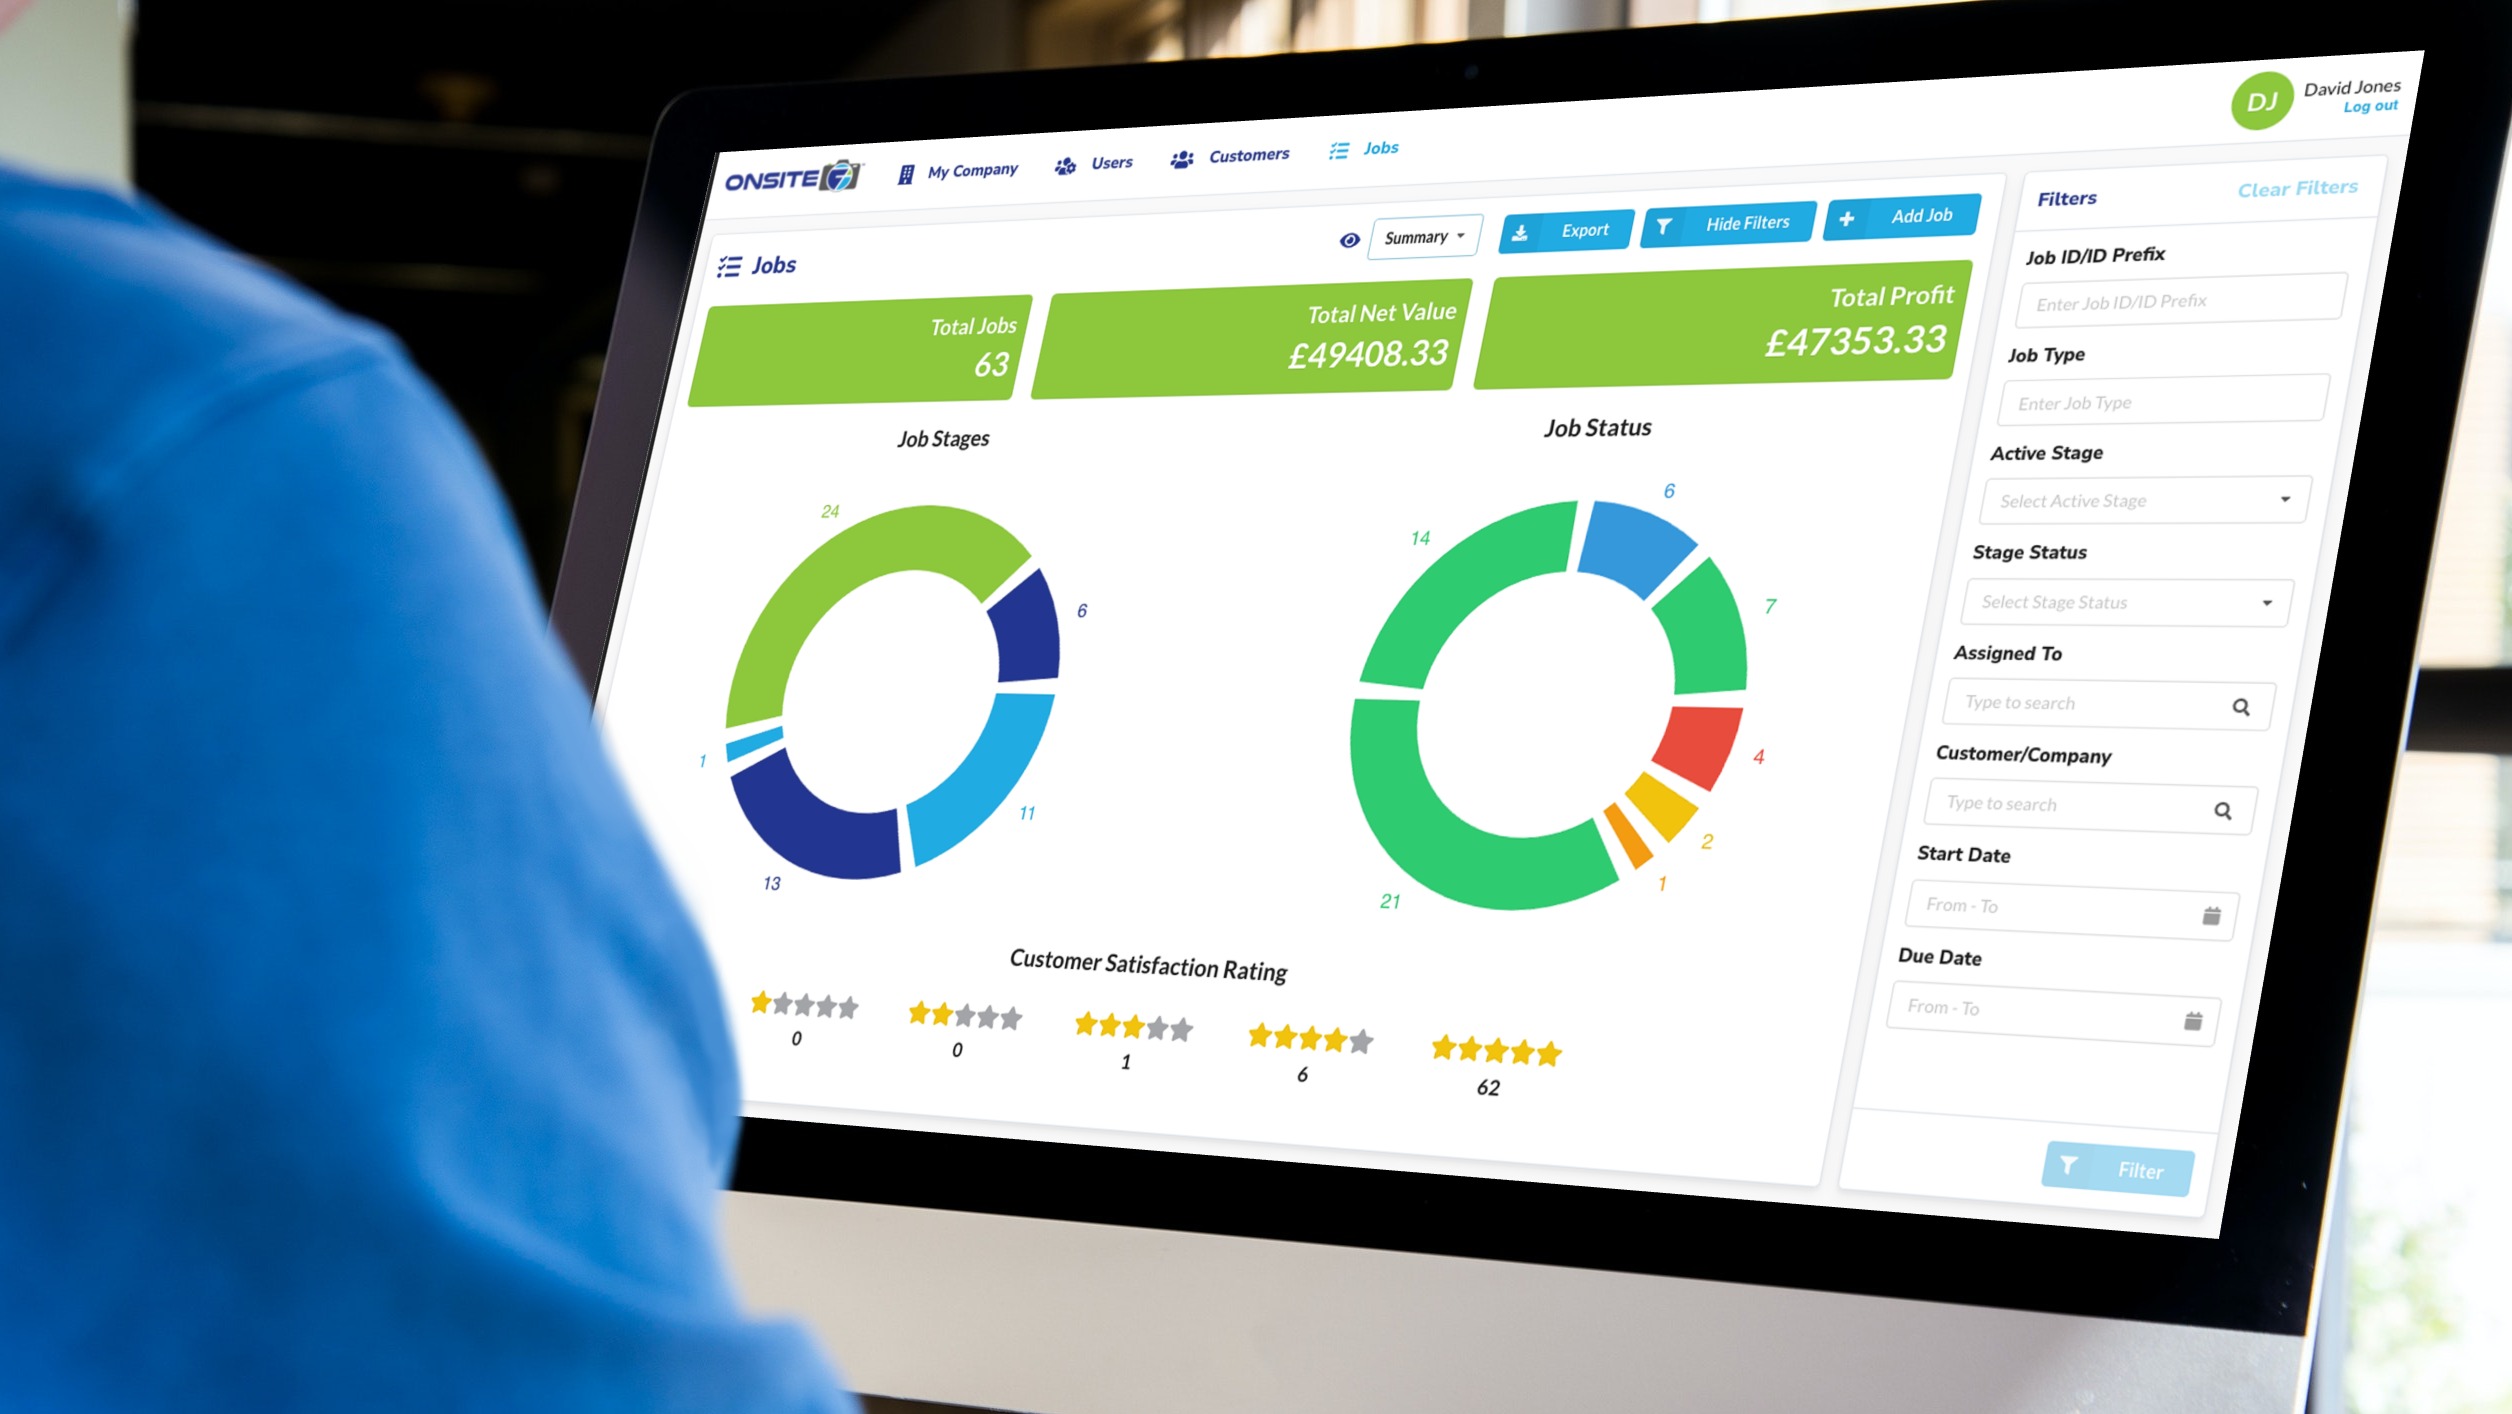 Review each stage of the companies projects, profit reports, customer satisfaction reviews, profit reports and more with one simple to use dashboard